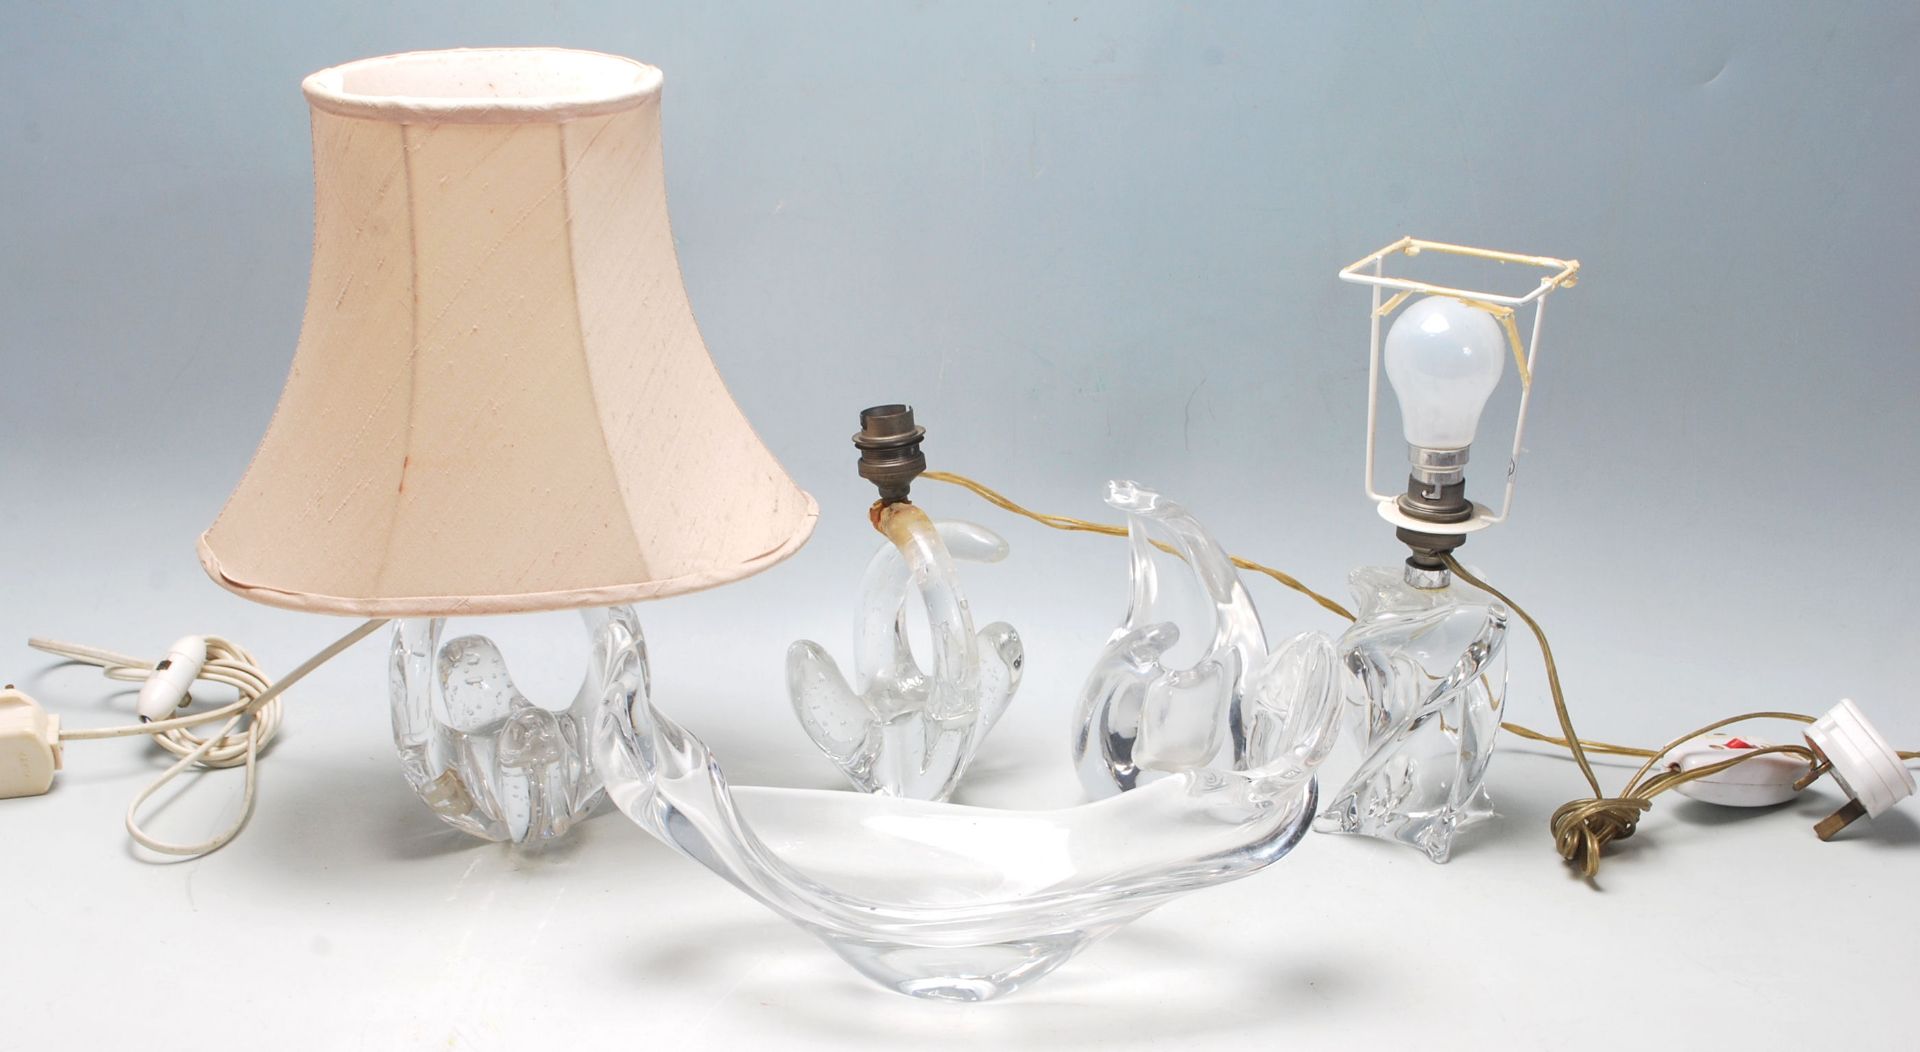 A collection of vintage and retro glass to include table lamp with a twist design, a pair of table